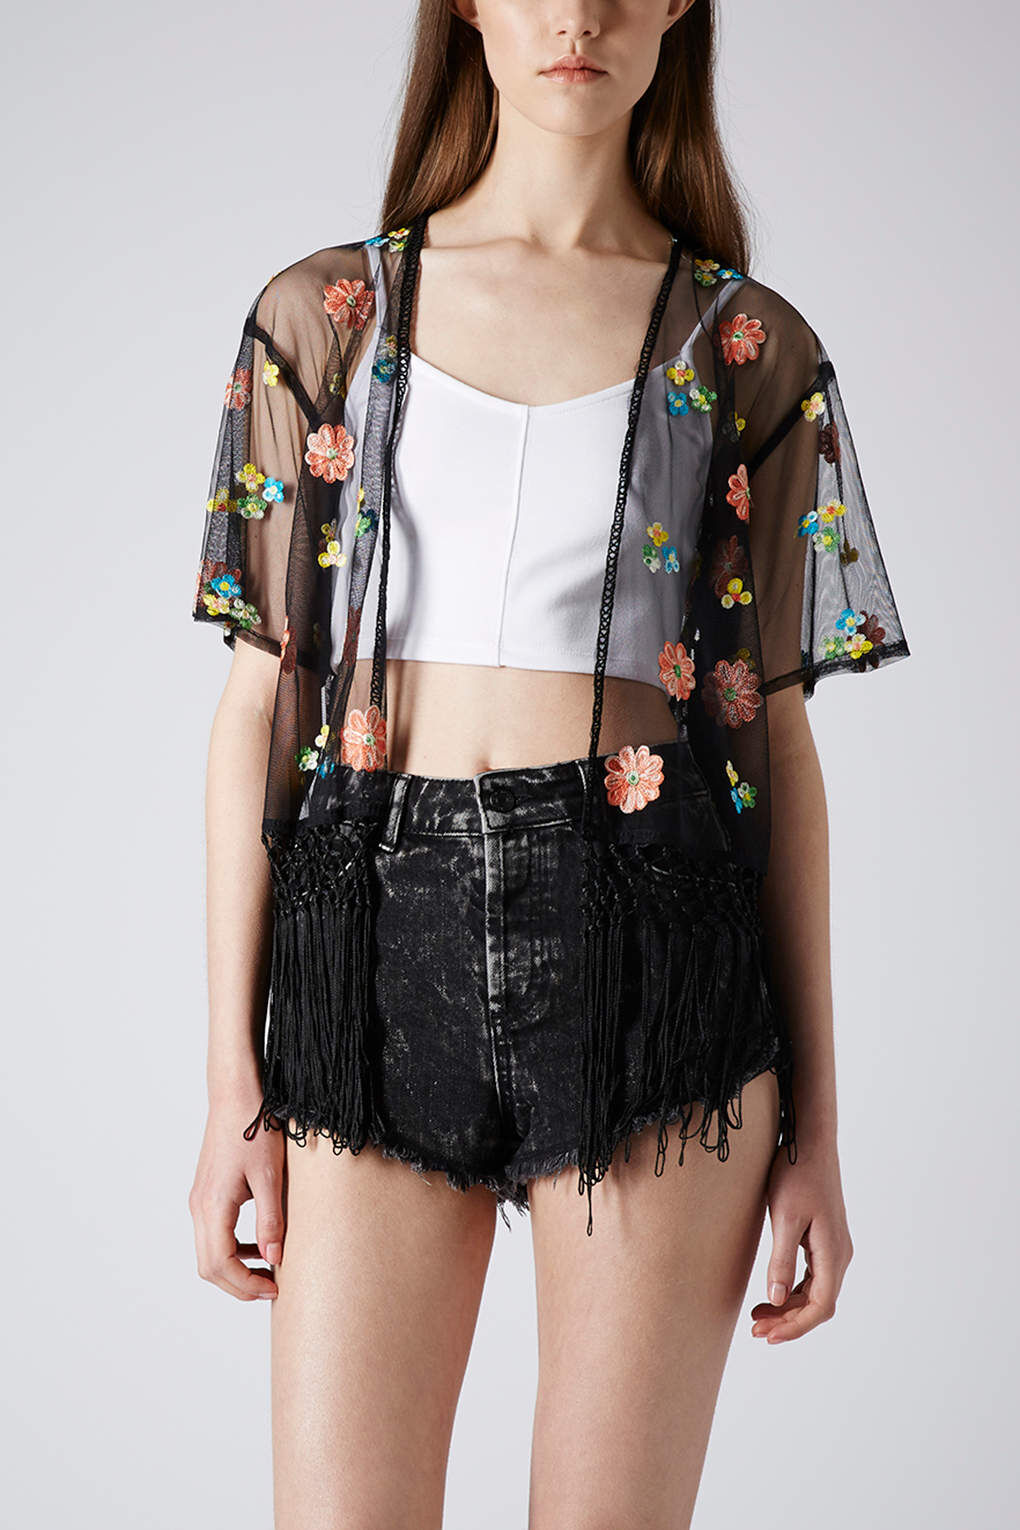 NEW TOPSHOP Embroidered Floral Kimono Fringe TOP BLOUSE Sz S/M BLACK SOLD OUT